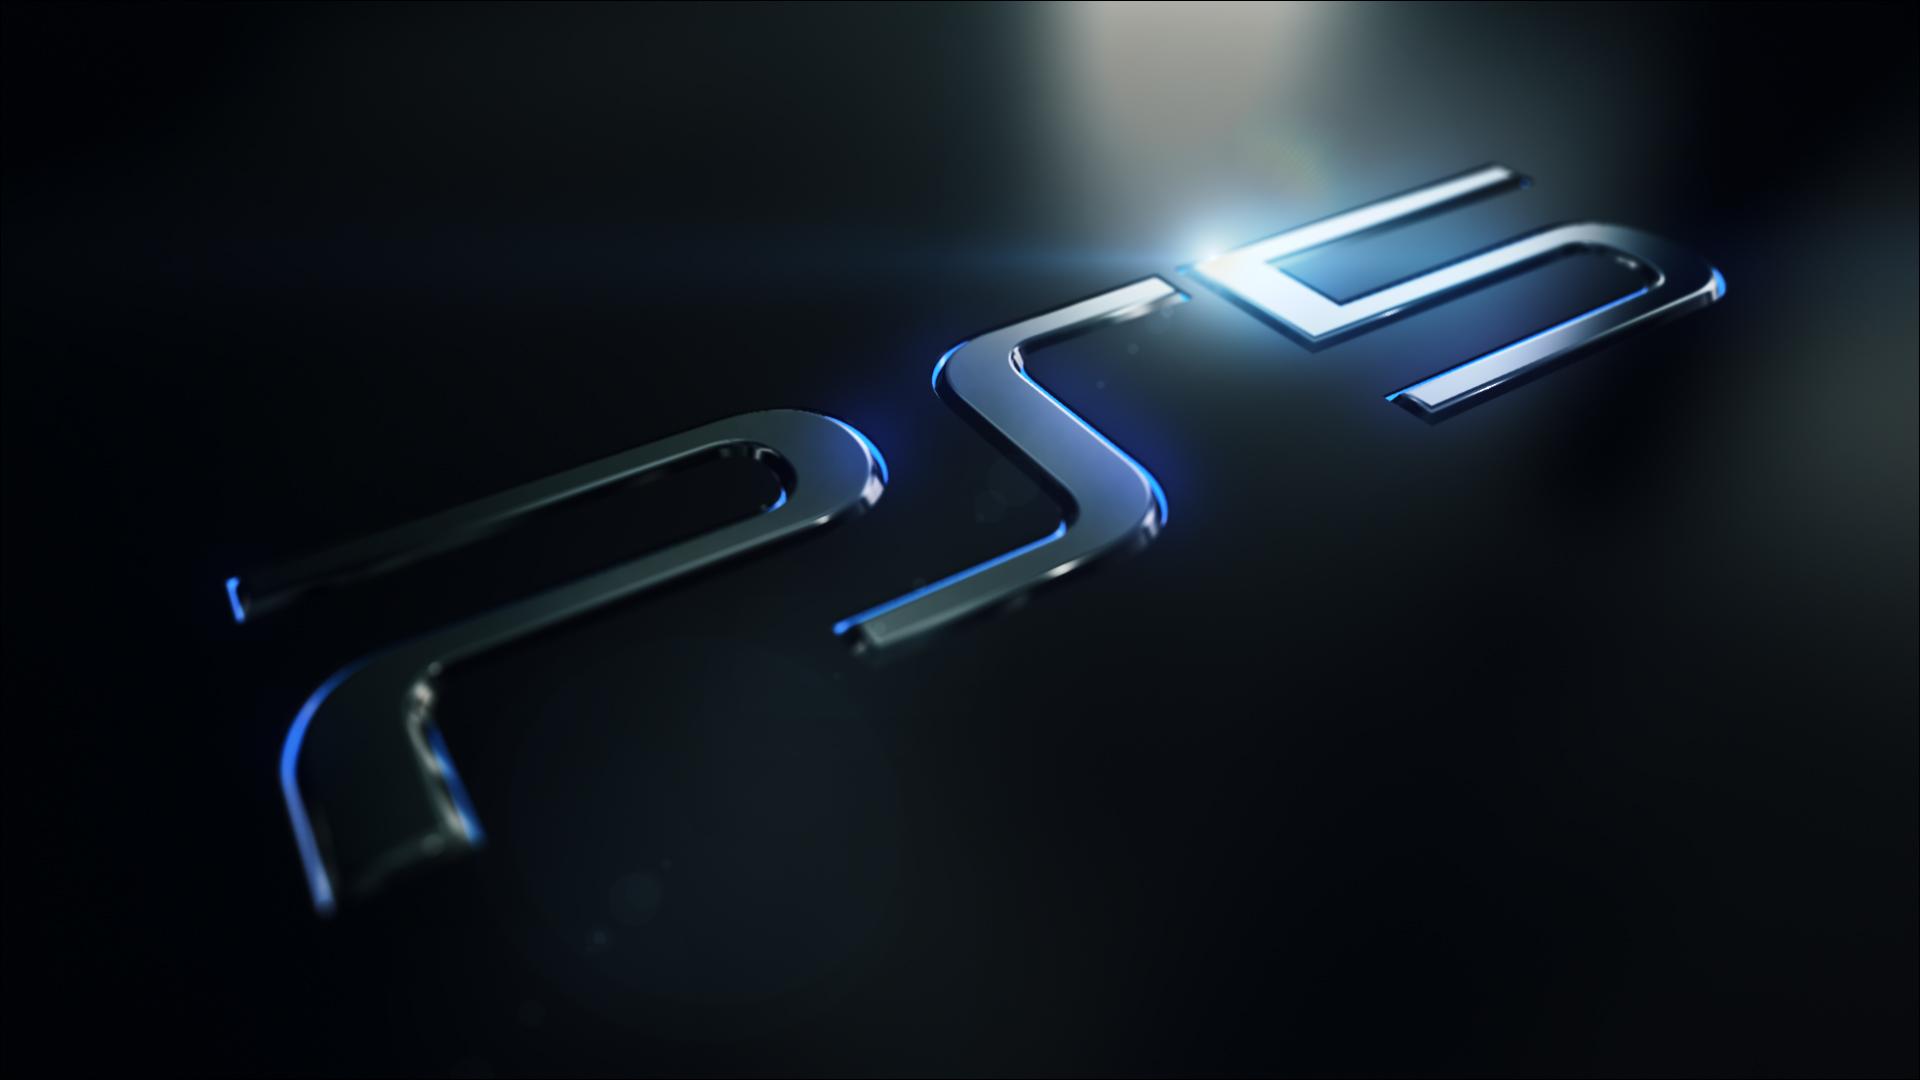 Sony PS5 price will it be, and when will we know